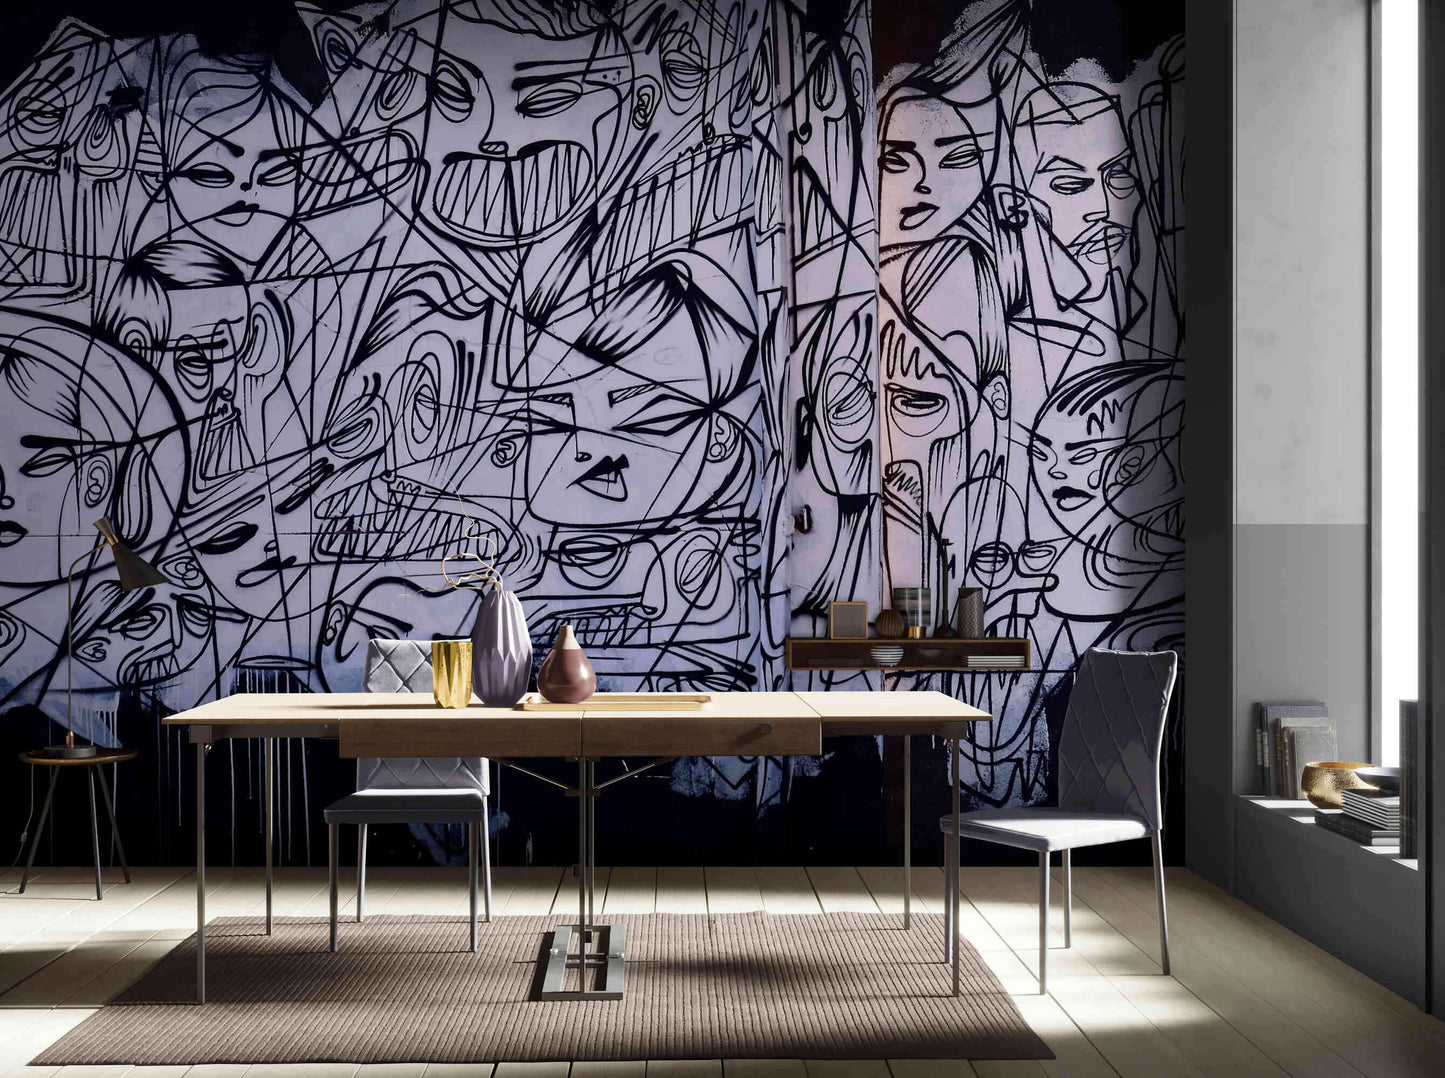 Shadowed graffiti art mural in black and white for an edgy room makeover.